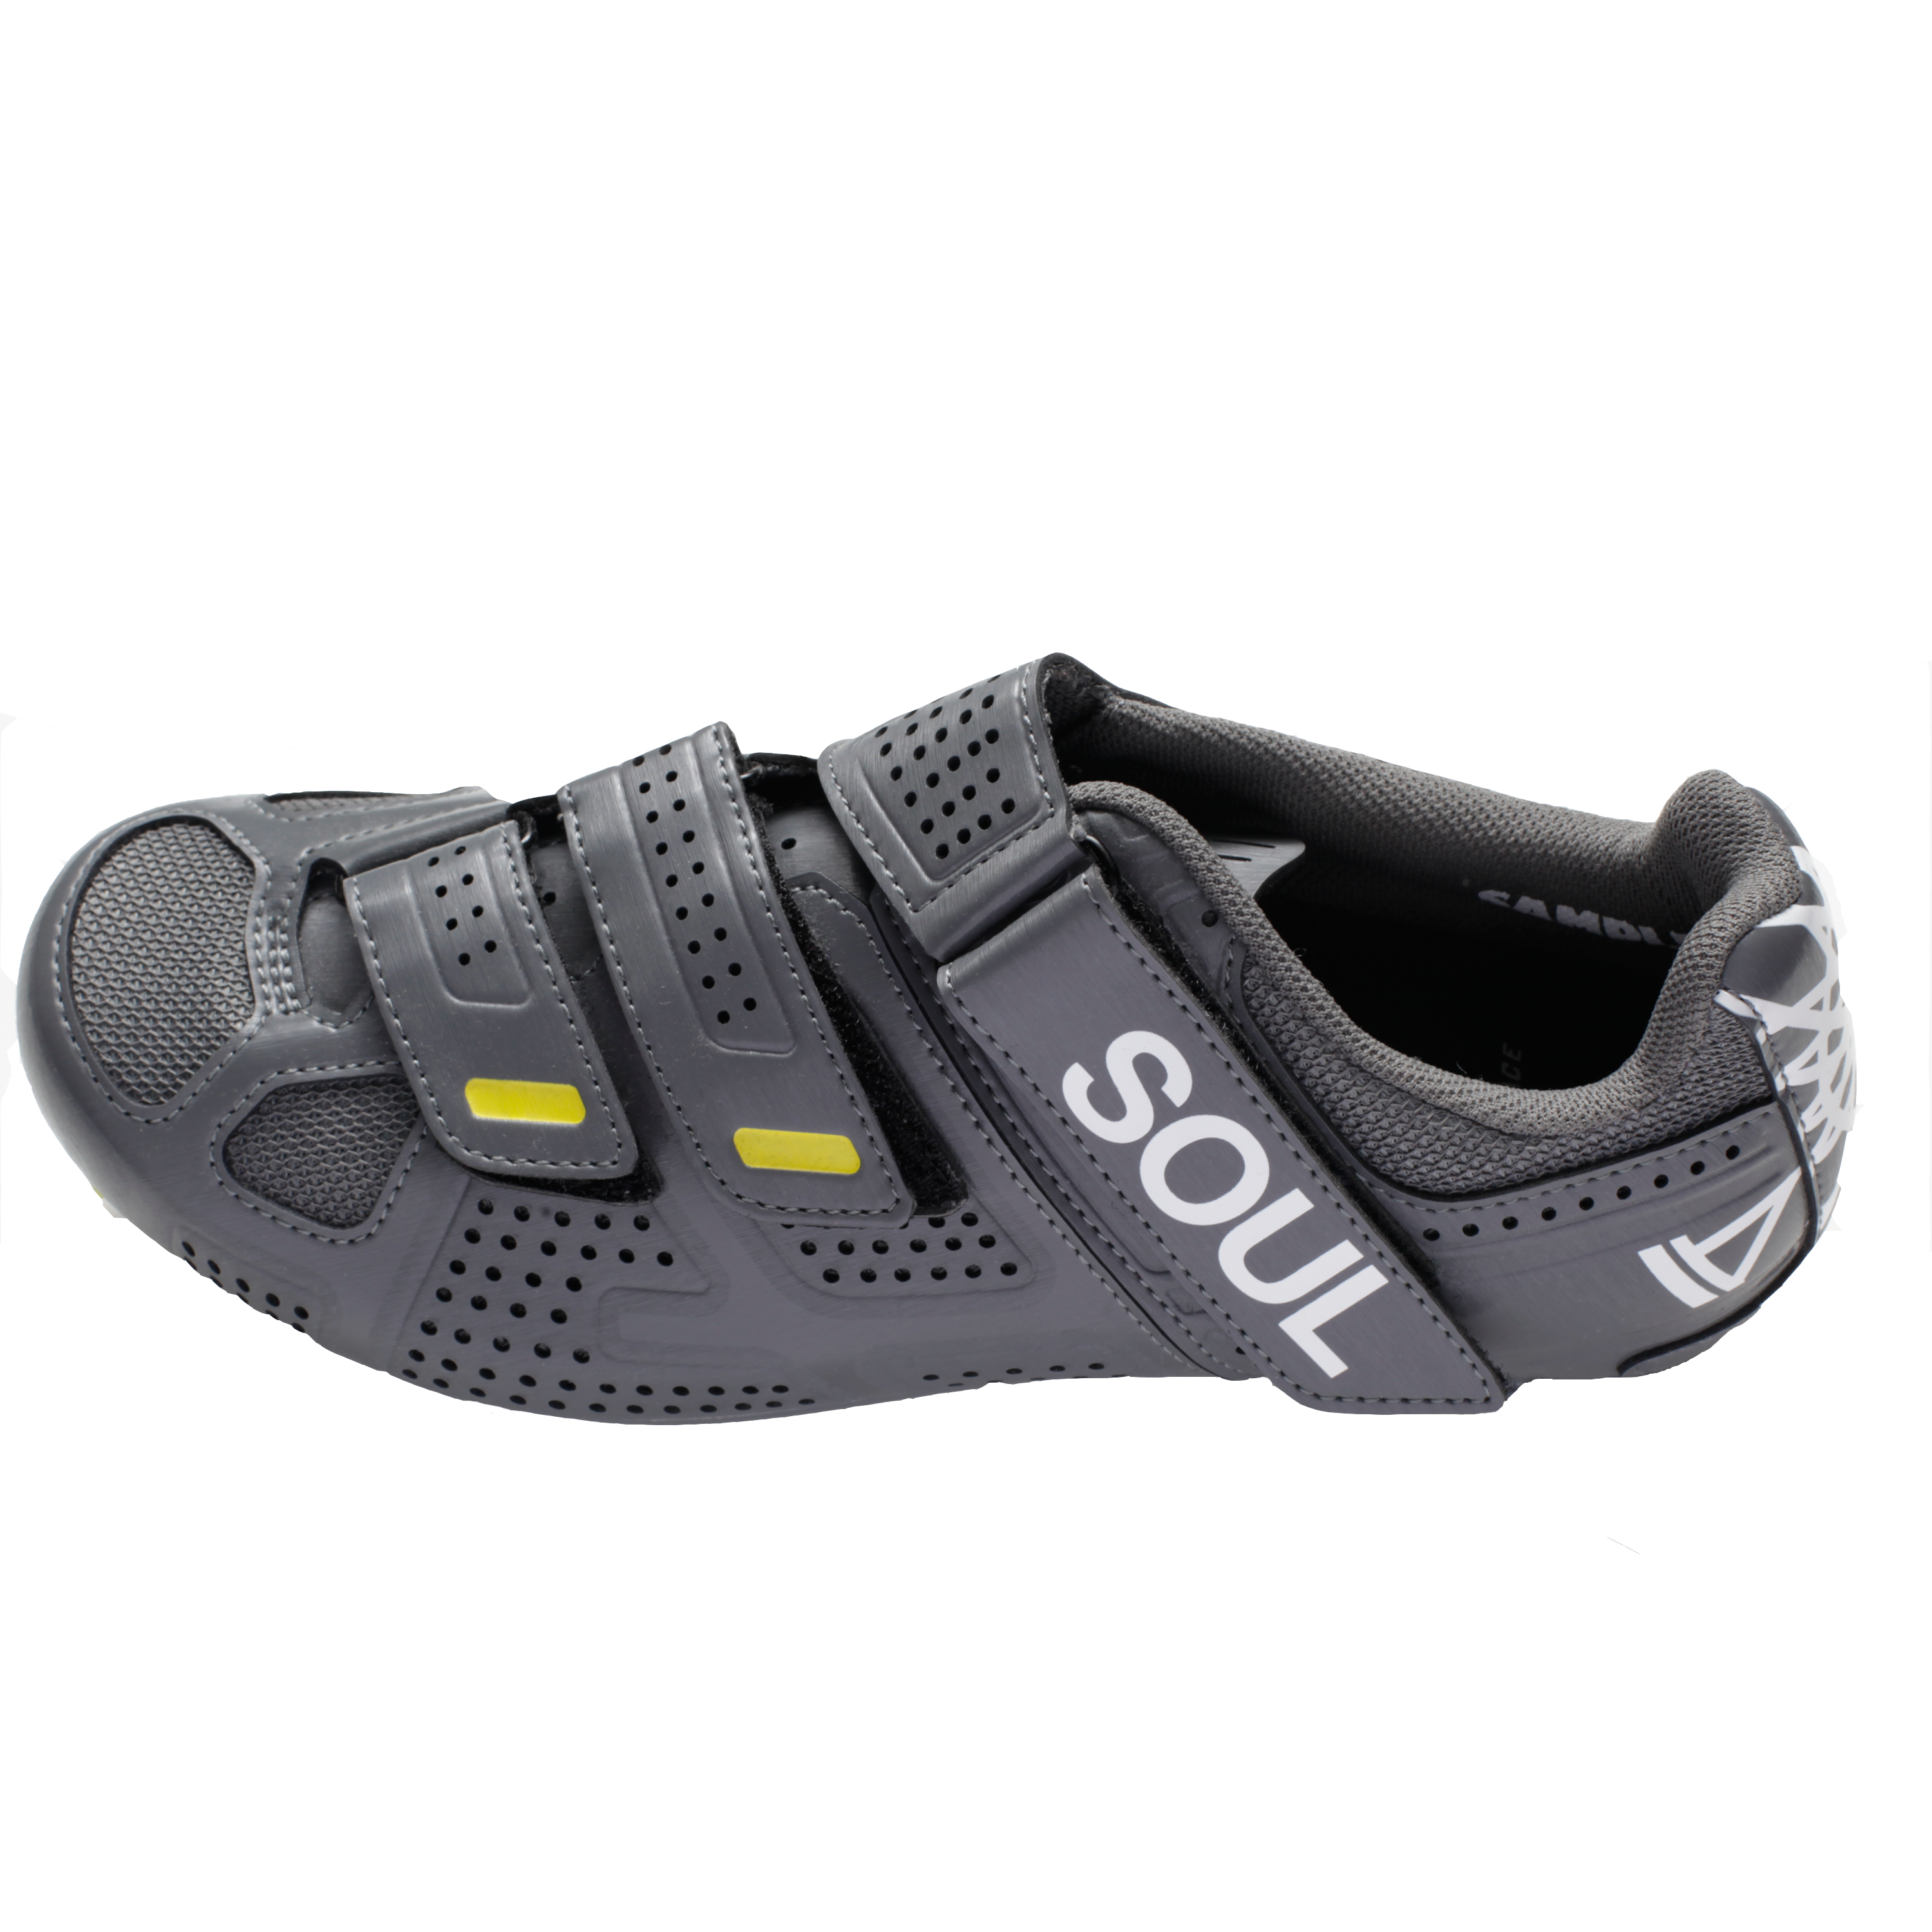 soulcycle bike cleats